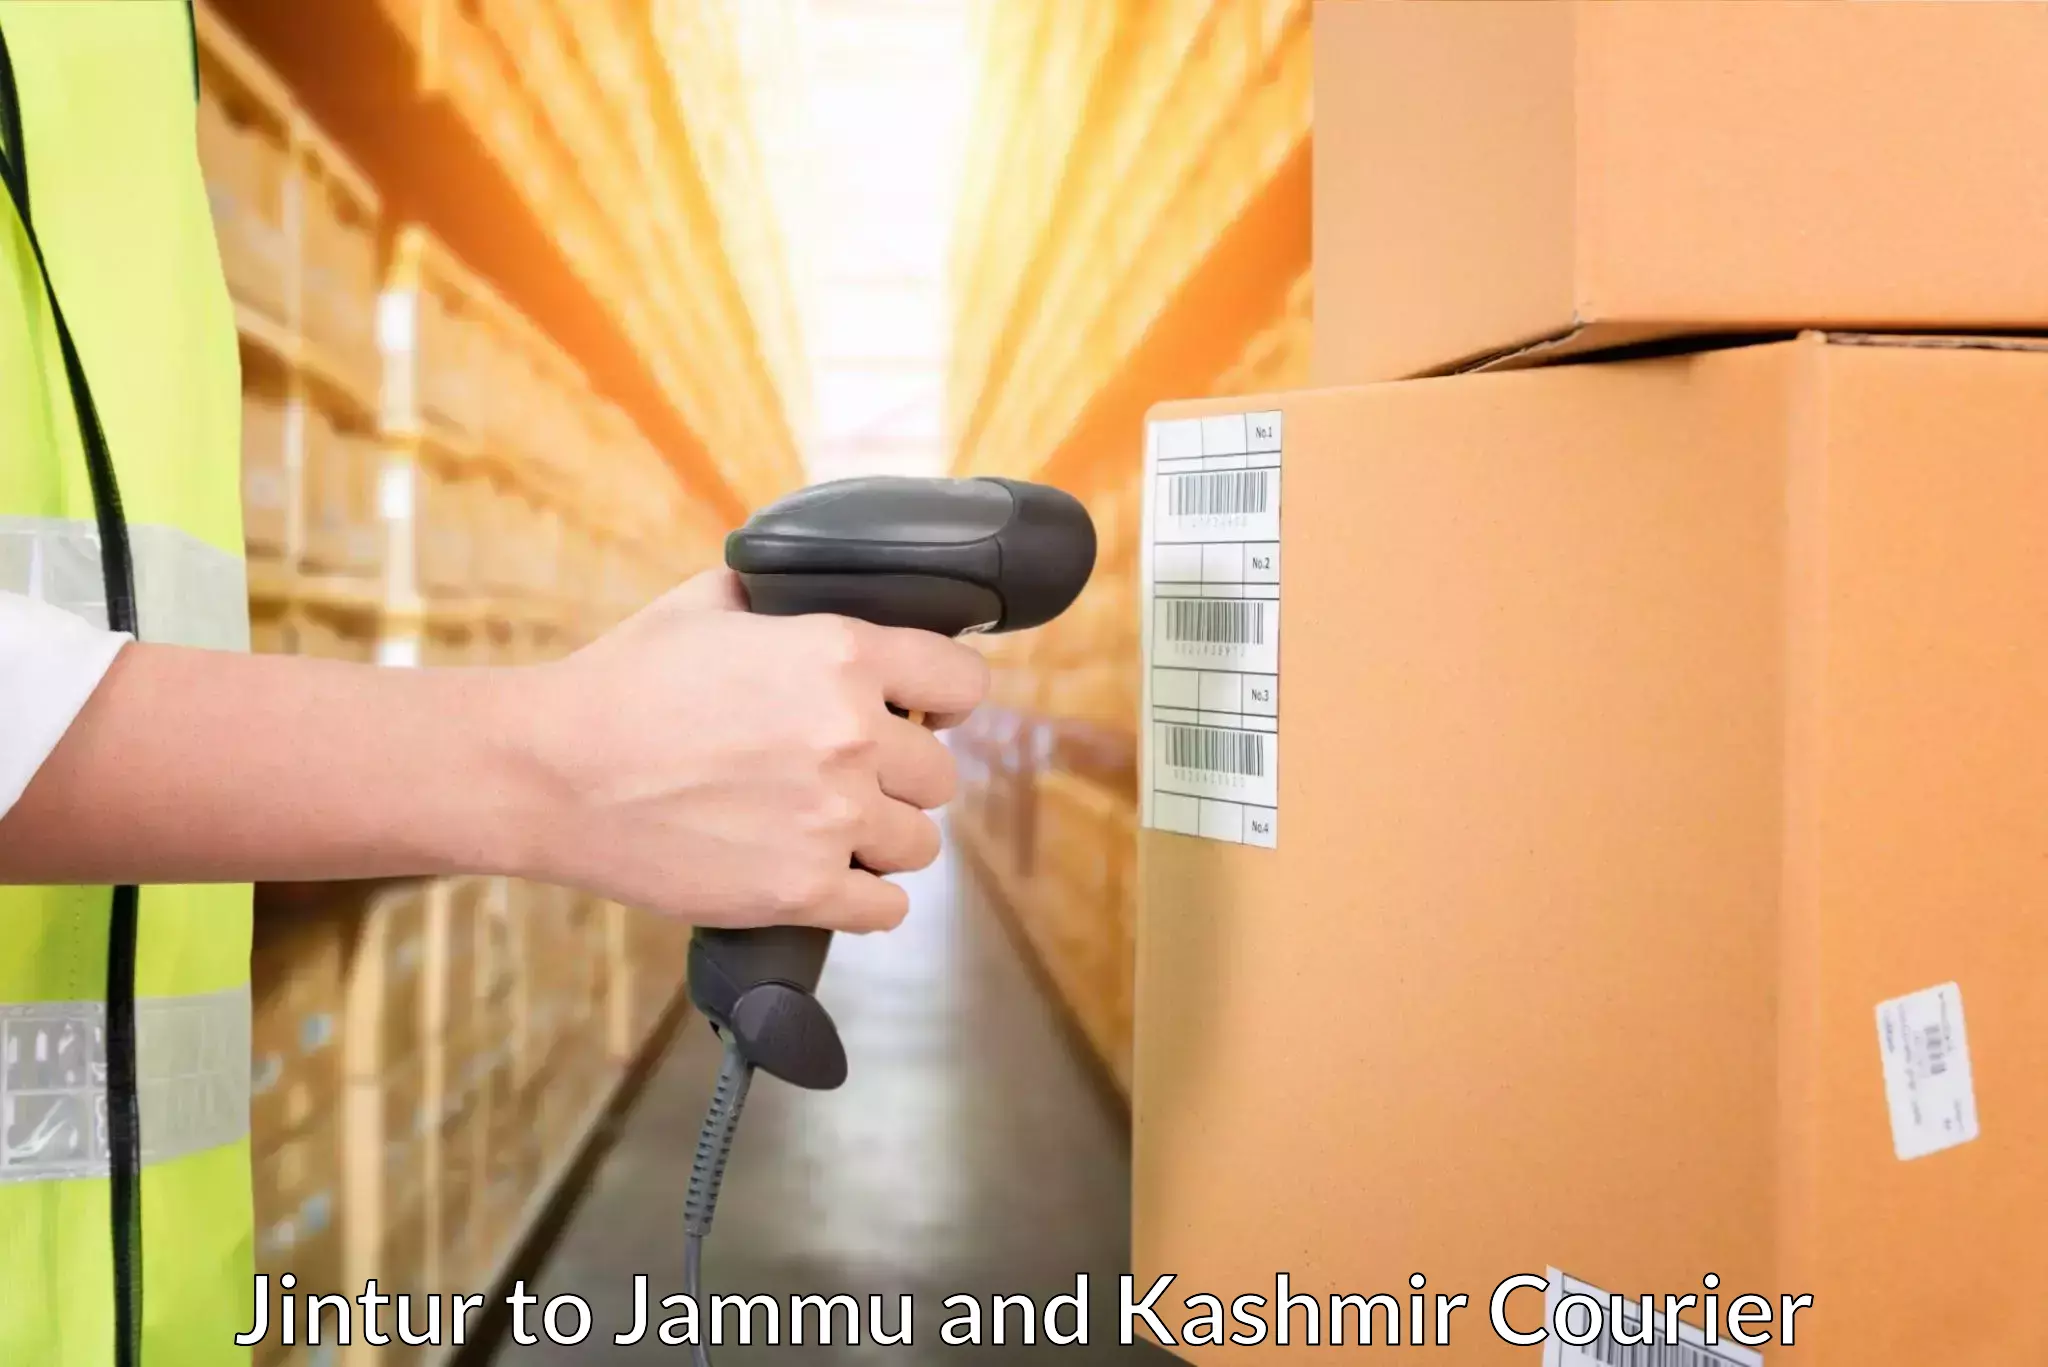 Nationwide shipping capabilities Jintur to Udhampur